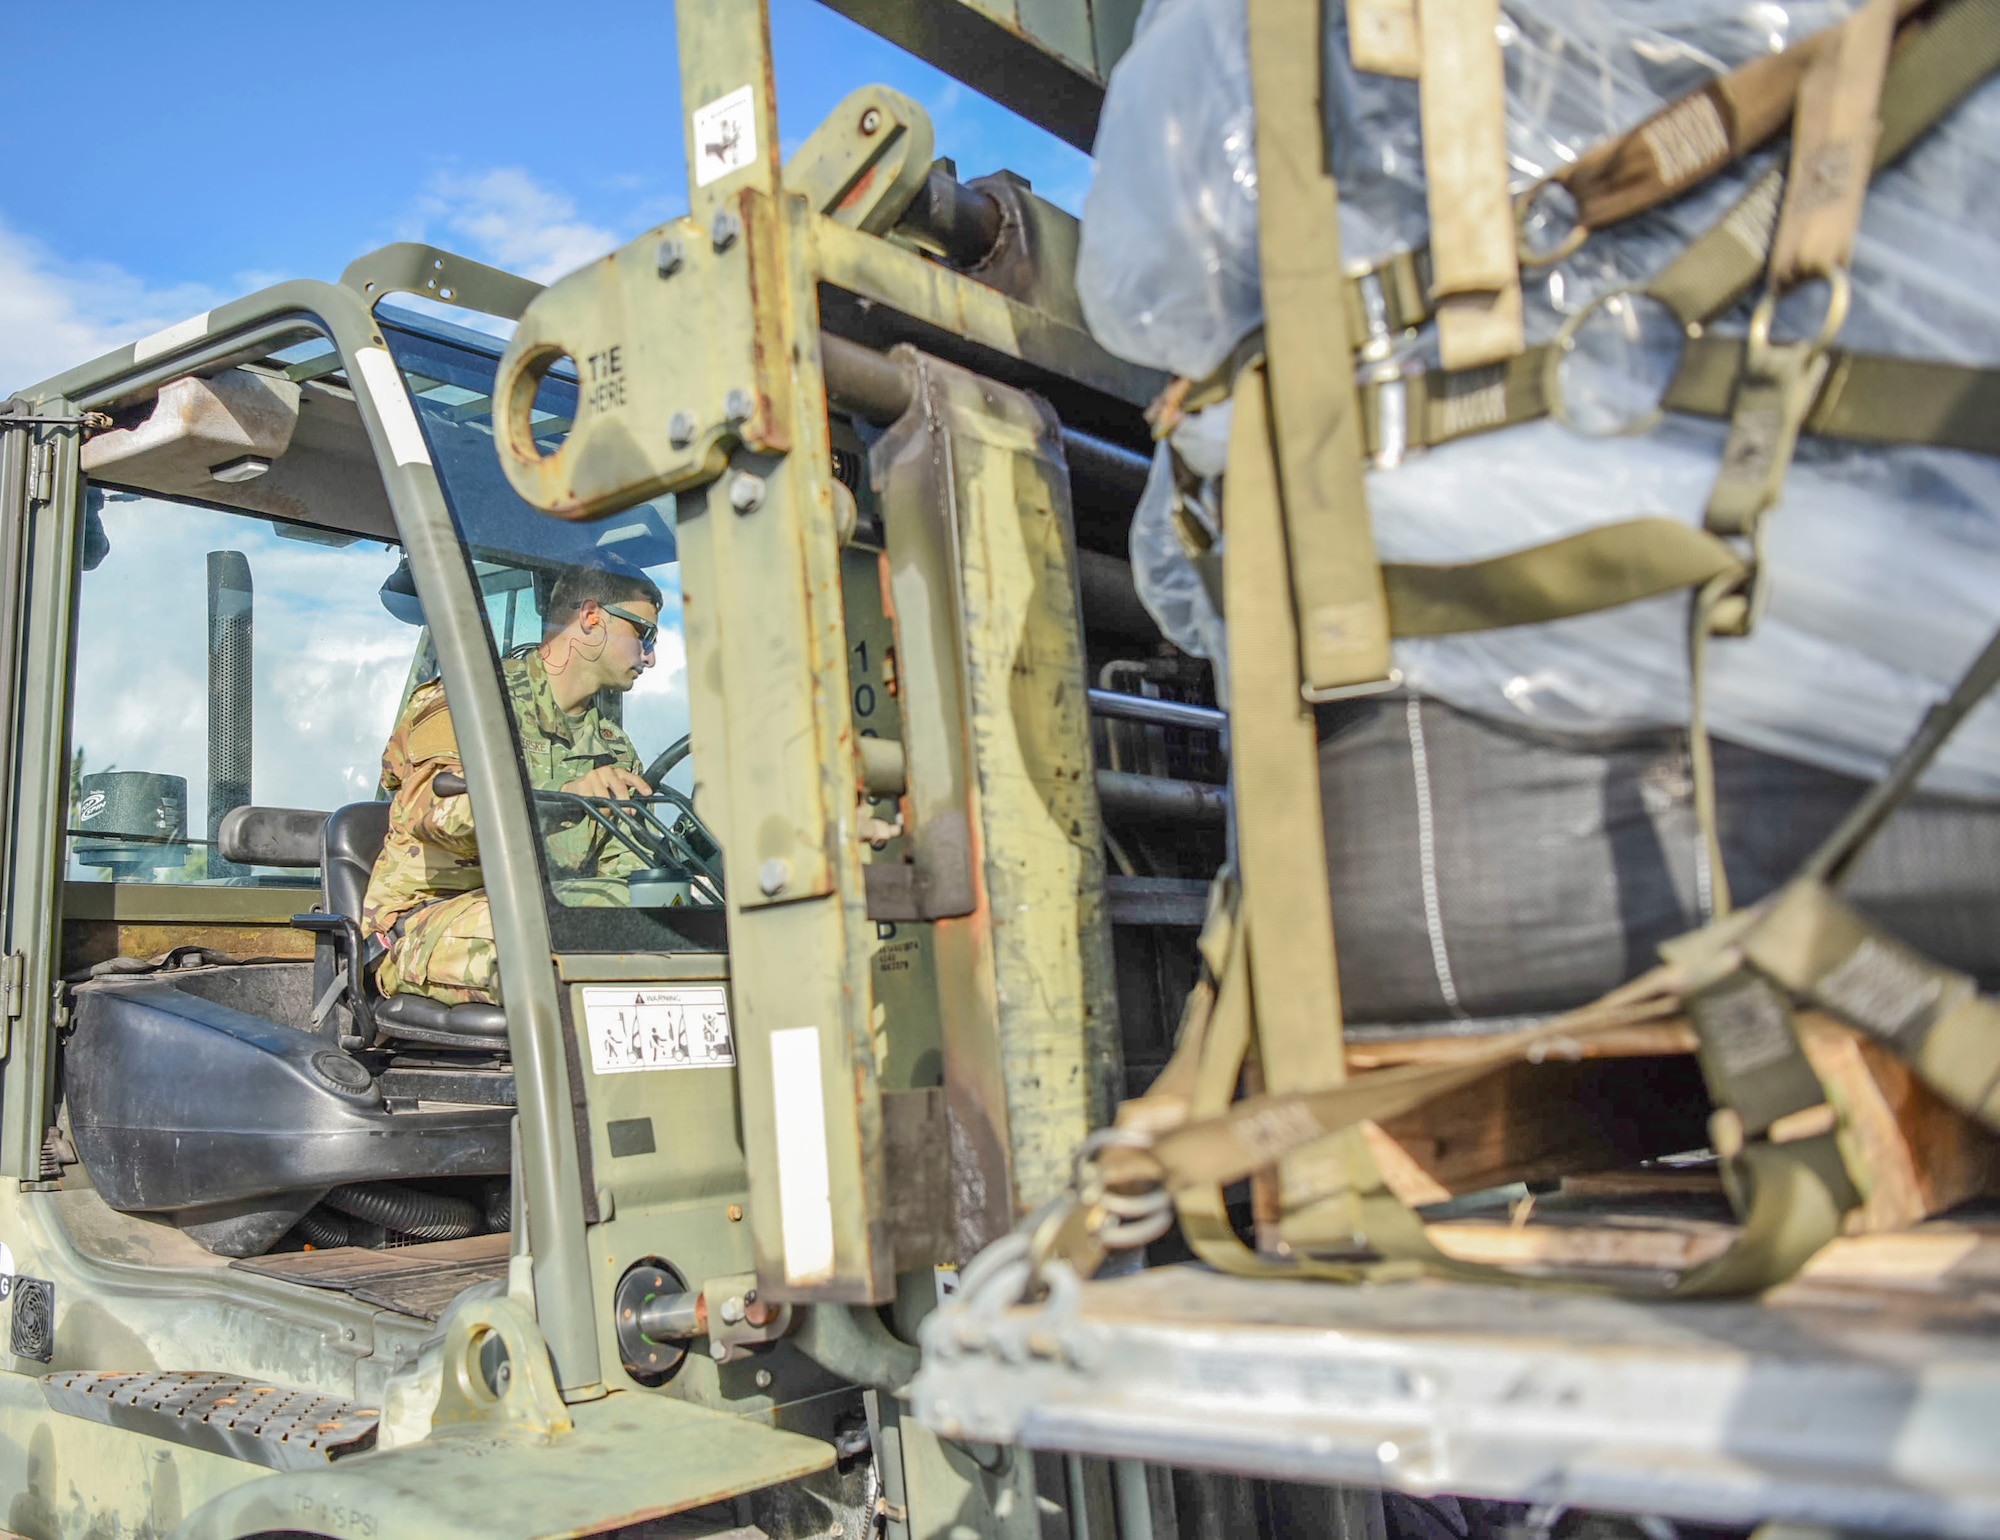 U.S. Air Force Senior Airman Chris Capra-Gerske, 647th Logistics Readiness Squadron combat mobility flight team member, downloads cargo within the cargo deployment function yard at Joint Base Pearl Harbor-Hickam, Hawaii, Dec. 22, 2021. The cargo was delivered by a C-5 Super Galaxy from Travis Air Force Base, carrying equipment to support the Granular Activated Carbon water filtration system and the water recovery efforts on Oahu.  (U.S. Air Force photo by Tech. Sgt. Anthony Nelson Jr.)